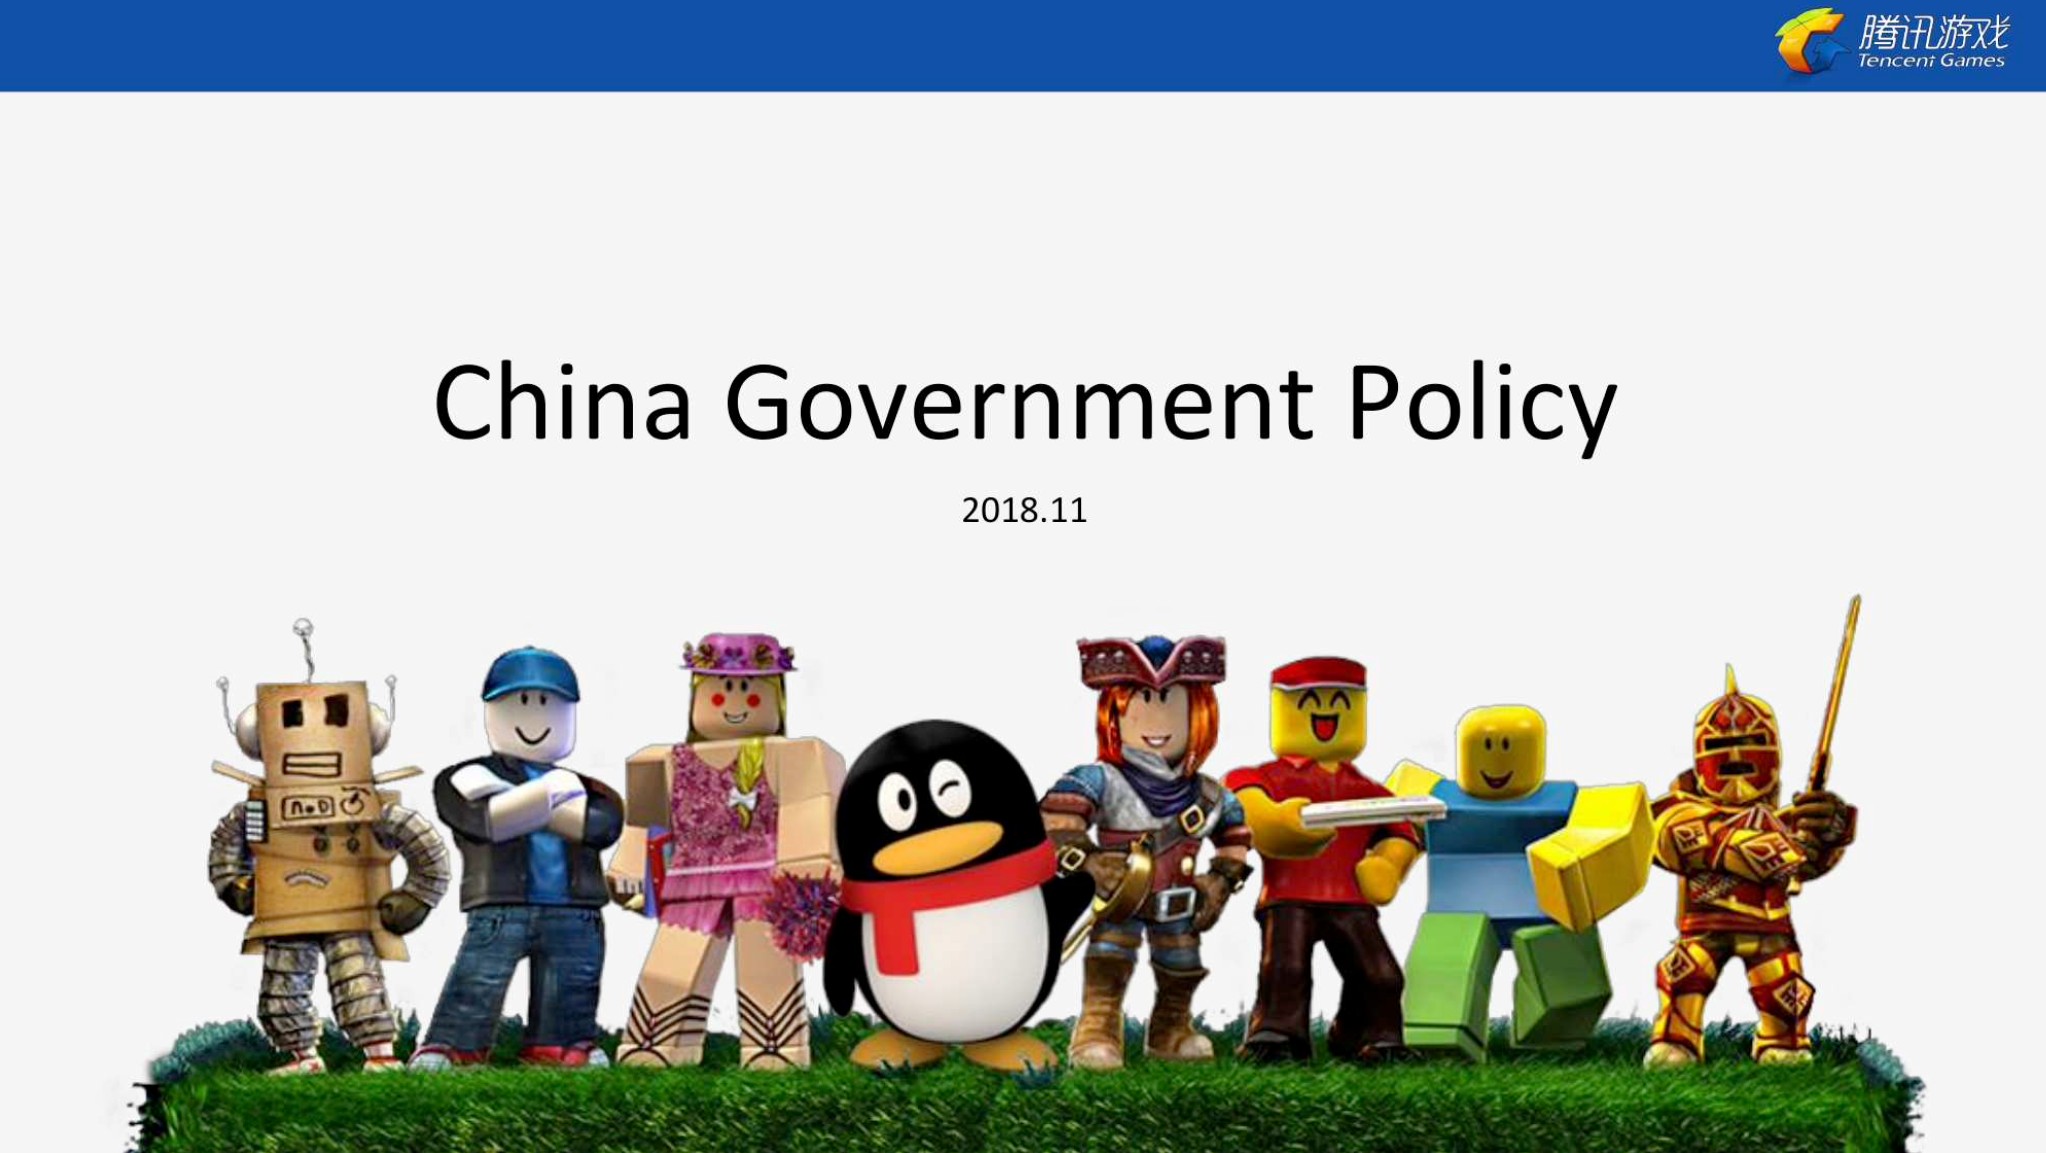 Roblox Controversially Shuts Down Its App In China